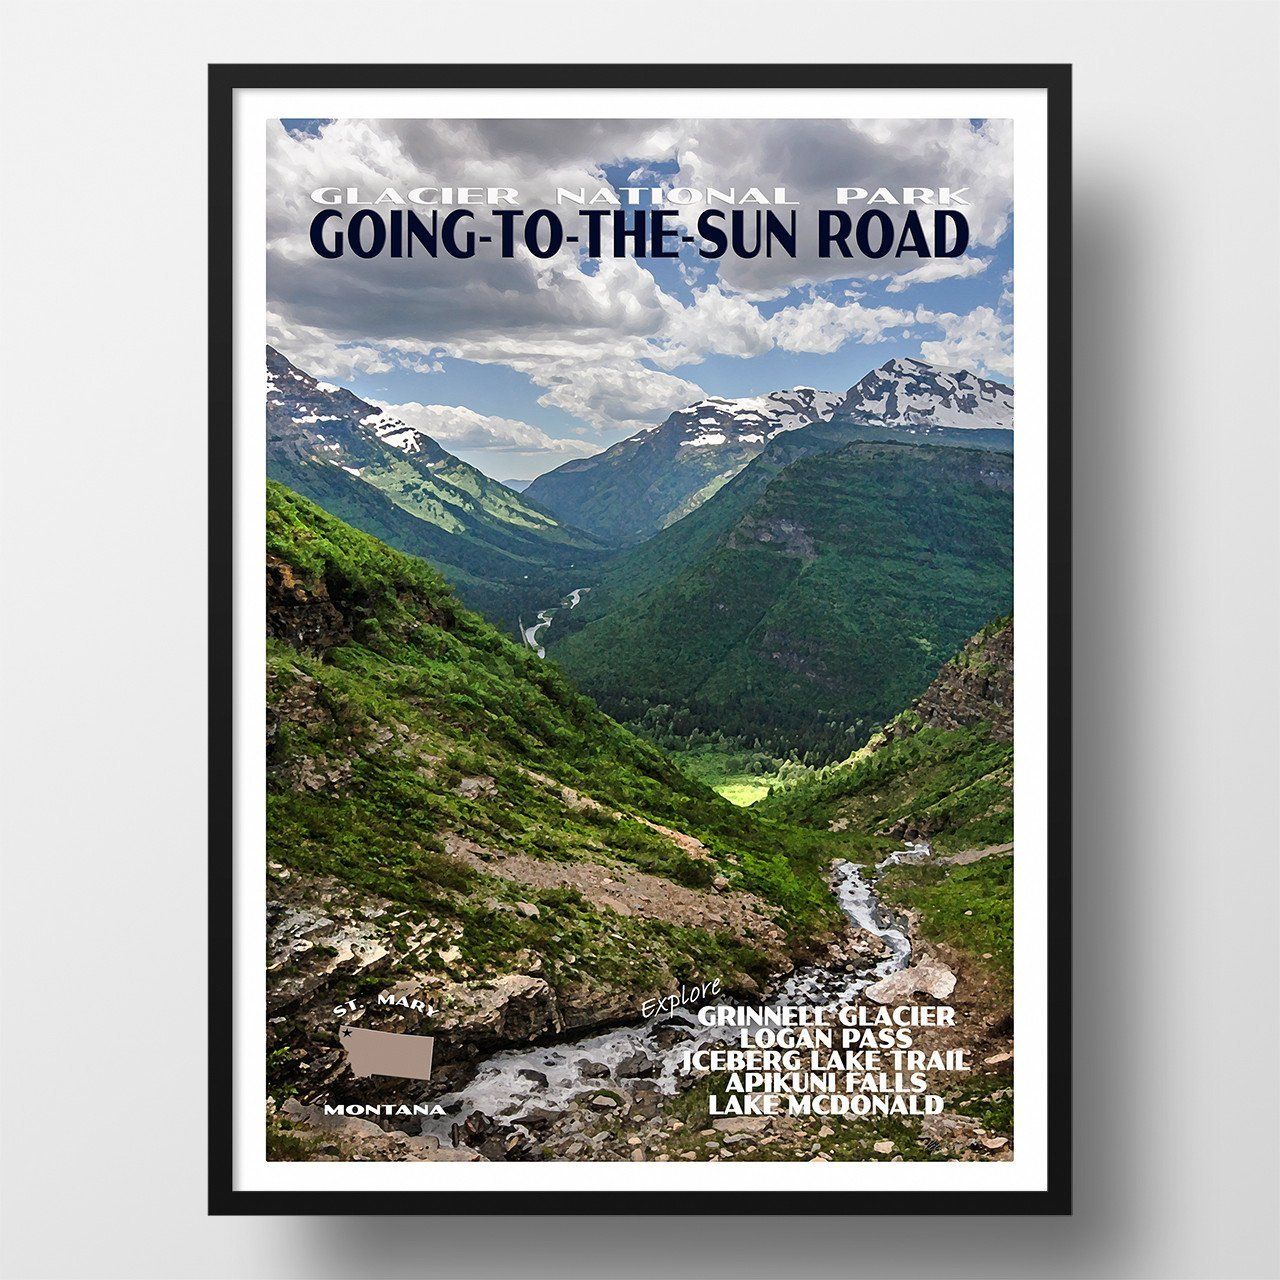 Glacier National Park Poster-Going-to-the-Sun Road